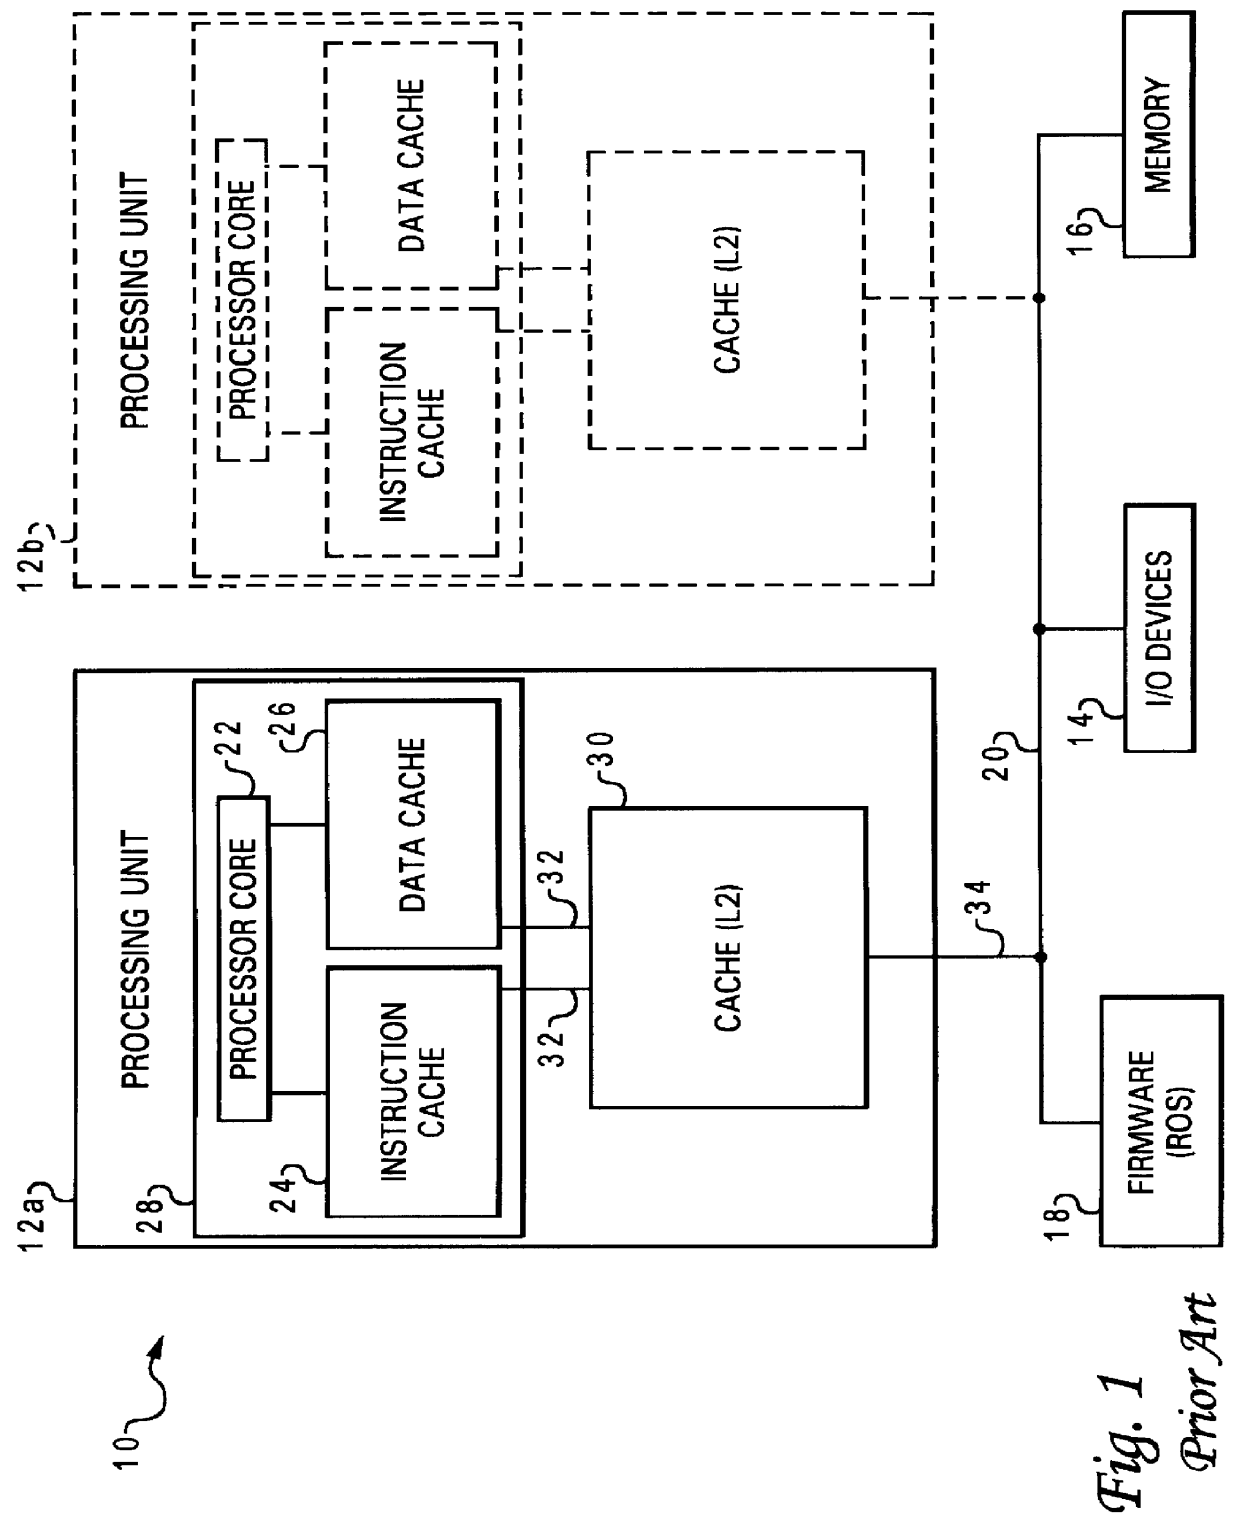 Multiple level cache memory with overlapped L1 and L2 memory access